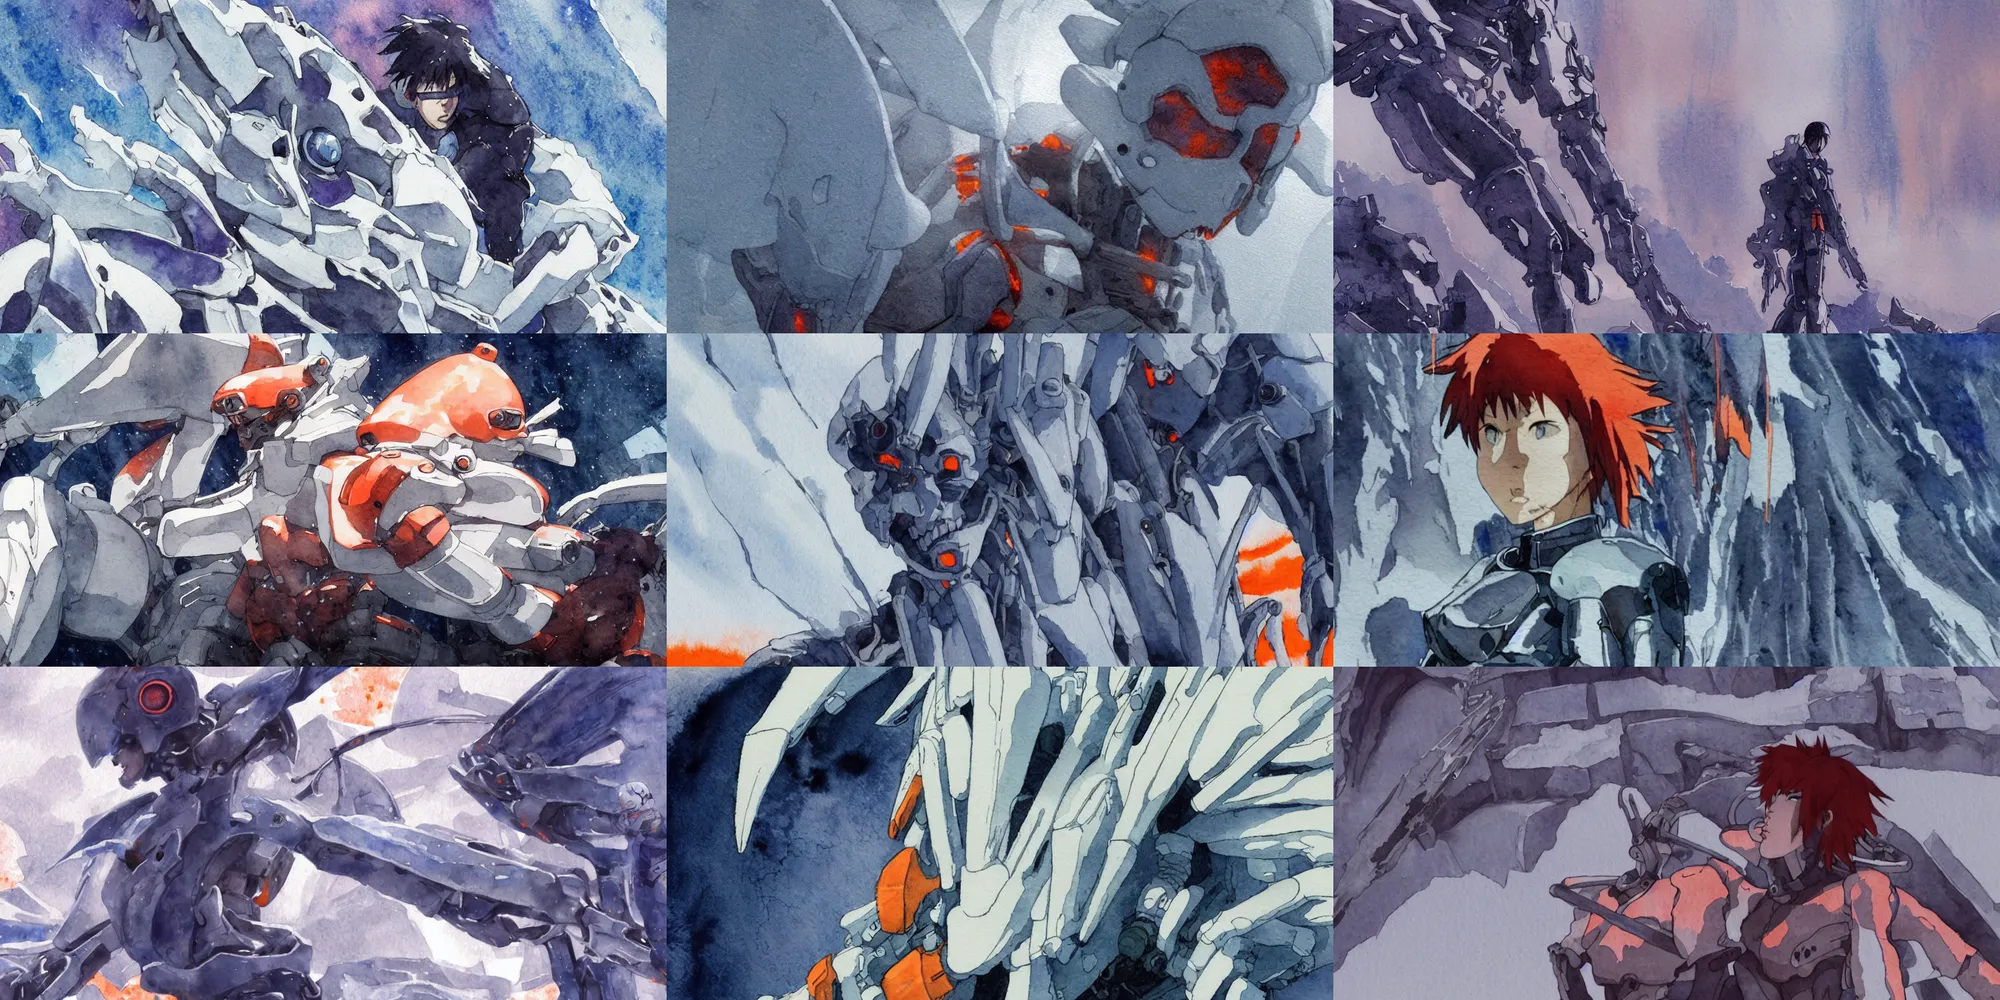 Prompt: incredible screenshot, simple watercolor, masamune shirow ghost in the shell movie scene close up broken Kusanagi, Giant robot head, giant robot bones, spine and ribs in glacier in Antarctica, rocky cliff, sparks, frozen waterfall, frost, snow, wearing a parker, windy, dust, most memorable scene, red, blue, orange, short hair, odd pipes, greebles, ice, metallic reflections, refraction, bounce light, phil hale, Yoji Shinkawa, bright rim light, hd, 4k, remaster, dynamic camera angle, deep 3 point perspective, fish eye, dynamic scene